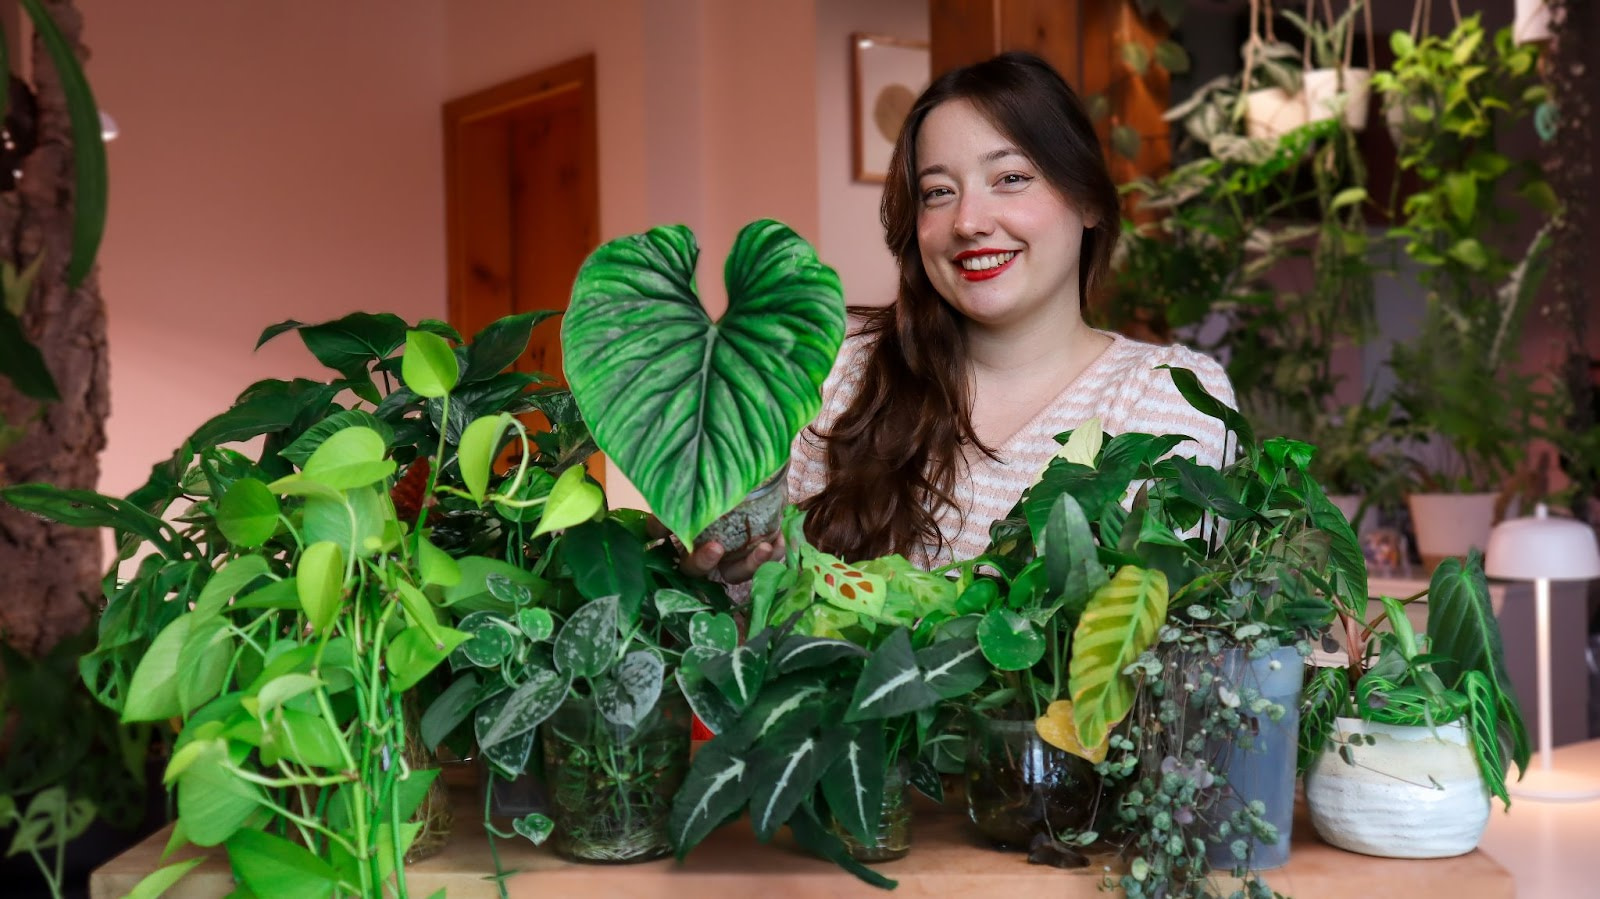 Kristina Chajdova with her plants - how to sell plants online from home